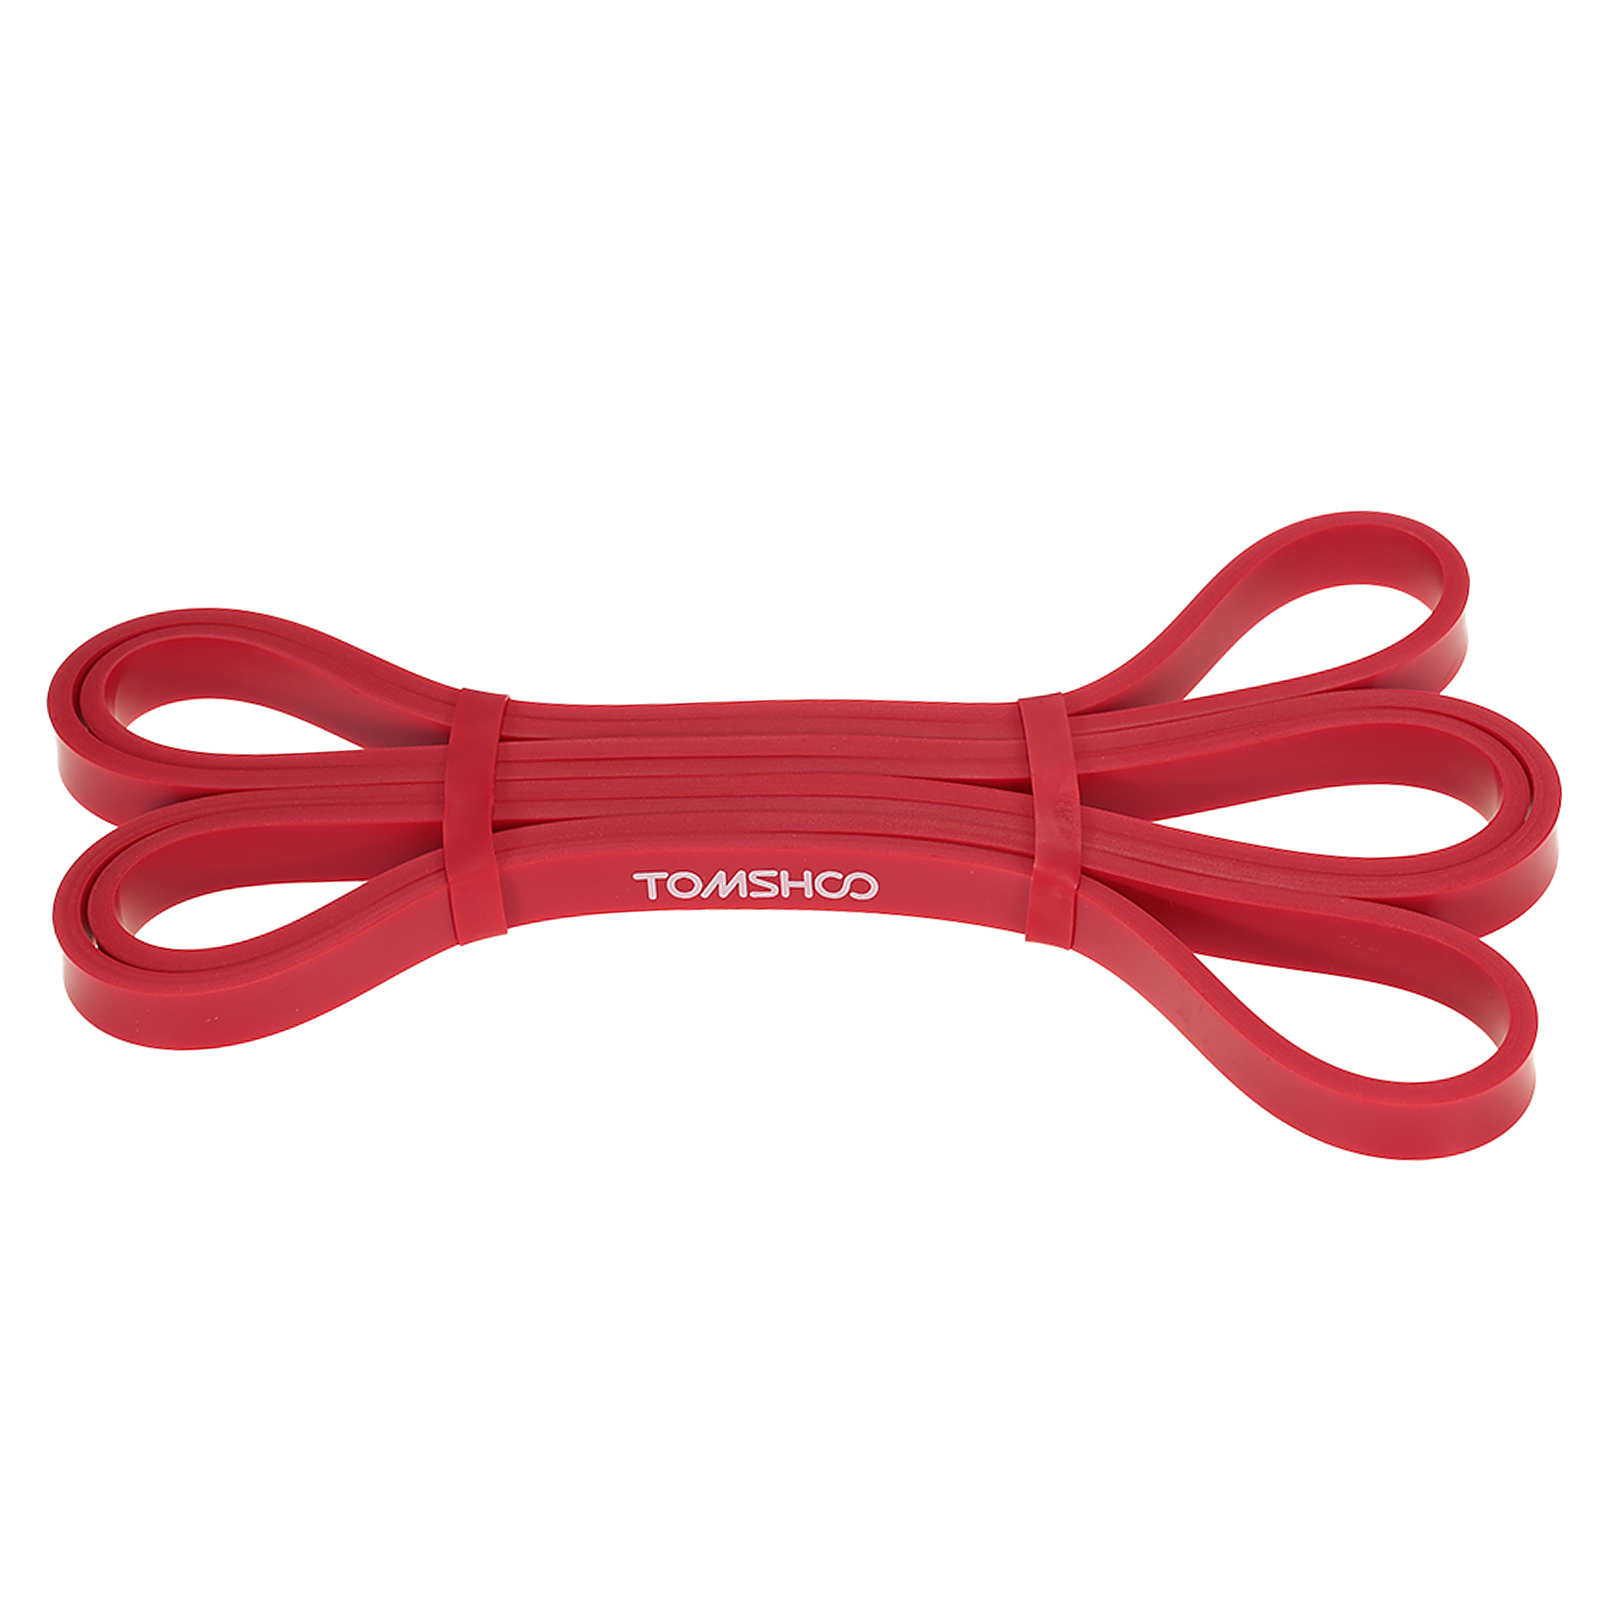 Exercise Bands Suppliers, Wholesale Prices